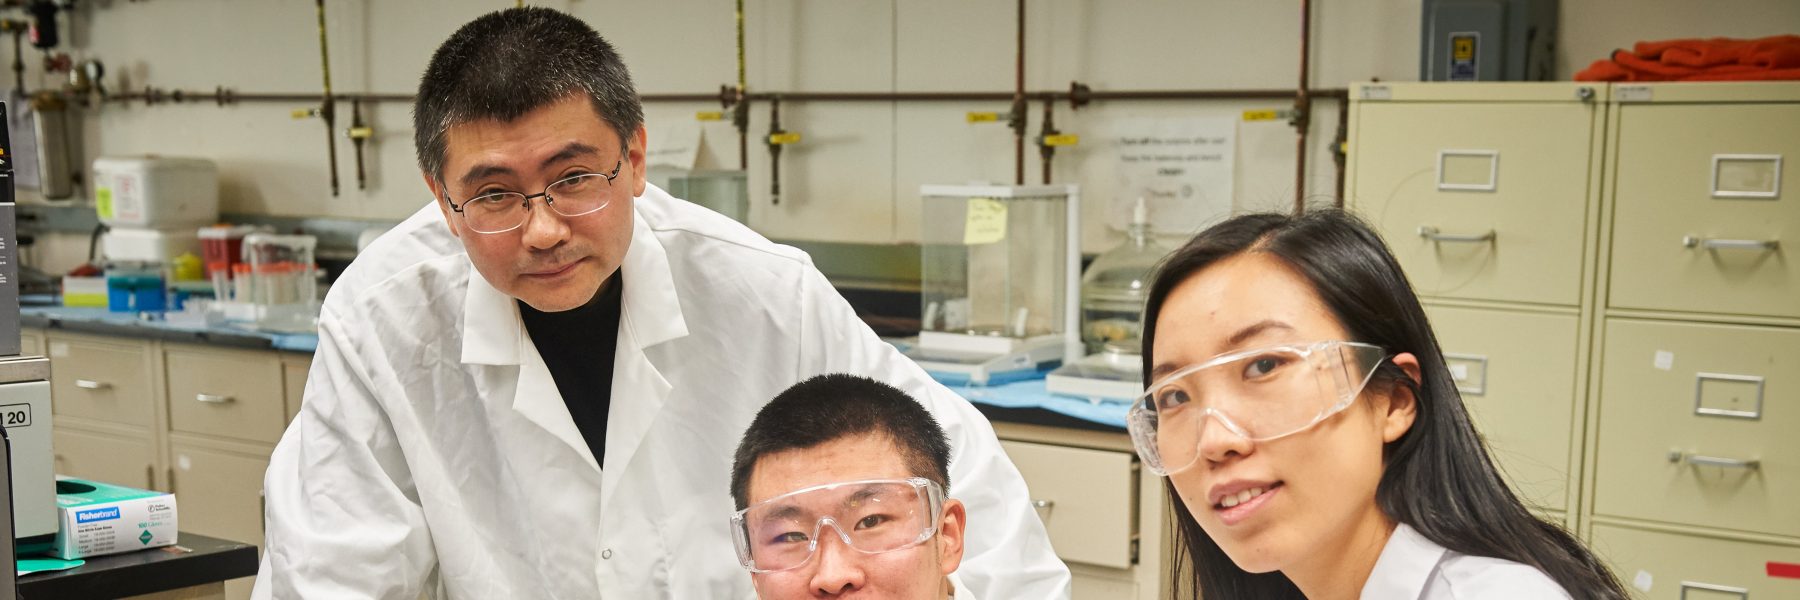 Yu Lei, associate professor of chemical & biomolecular engineering, left, with graduate students Qiuchen Dong and Xiaoyu Ma connect a toxic chemical sensor to a cable in the lab at the United Technologies Engineering Building on Feb. 2, 2016. (Peter Morenus for UConn)